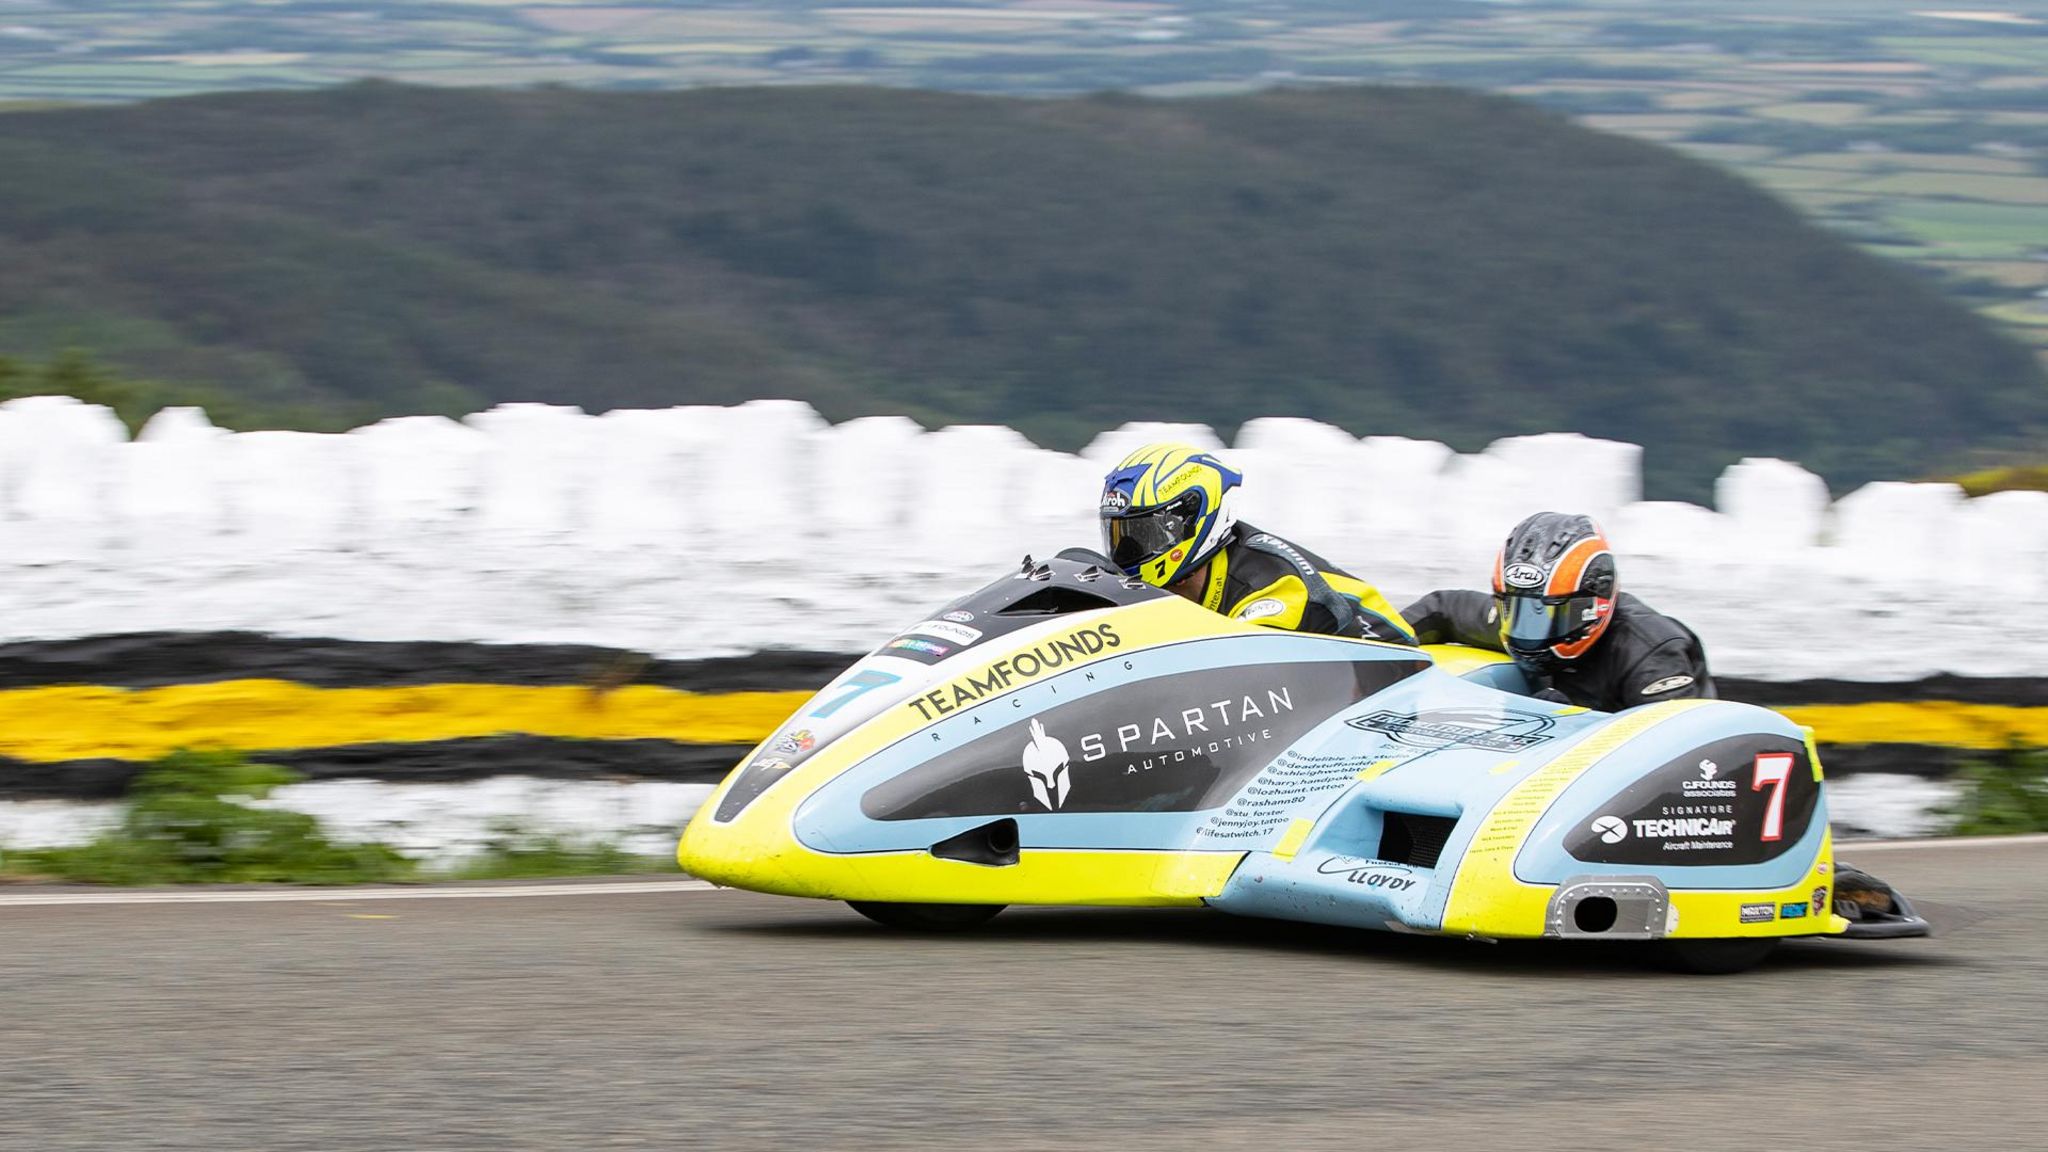 Alan Founds and Colin Smyth racing a sidecar